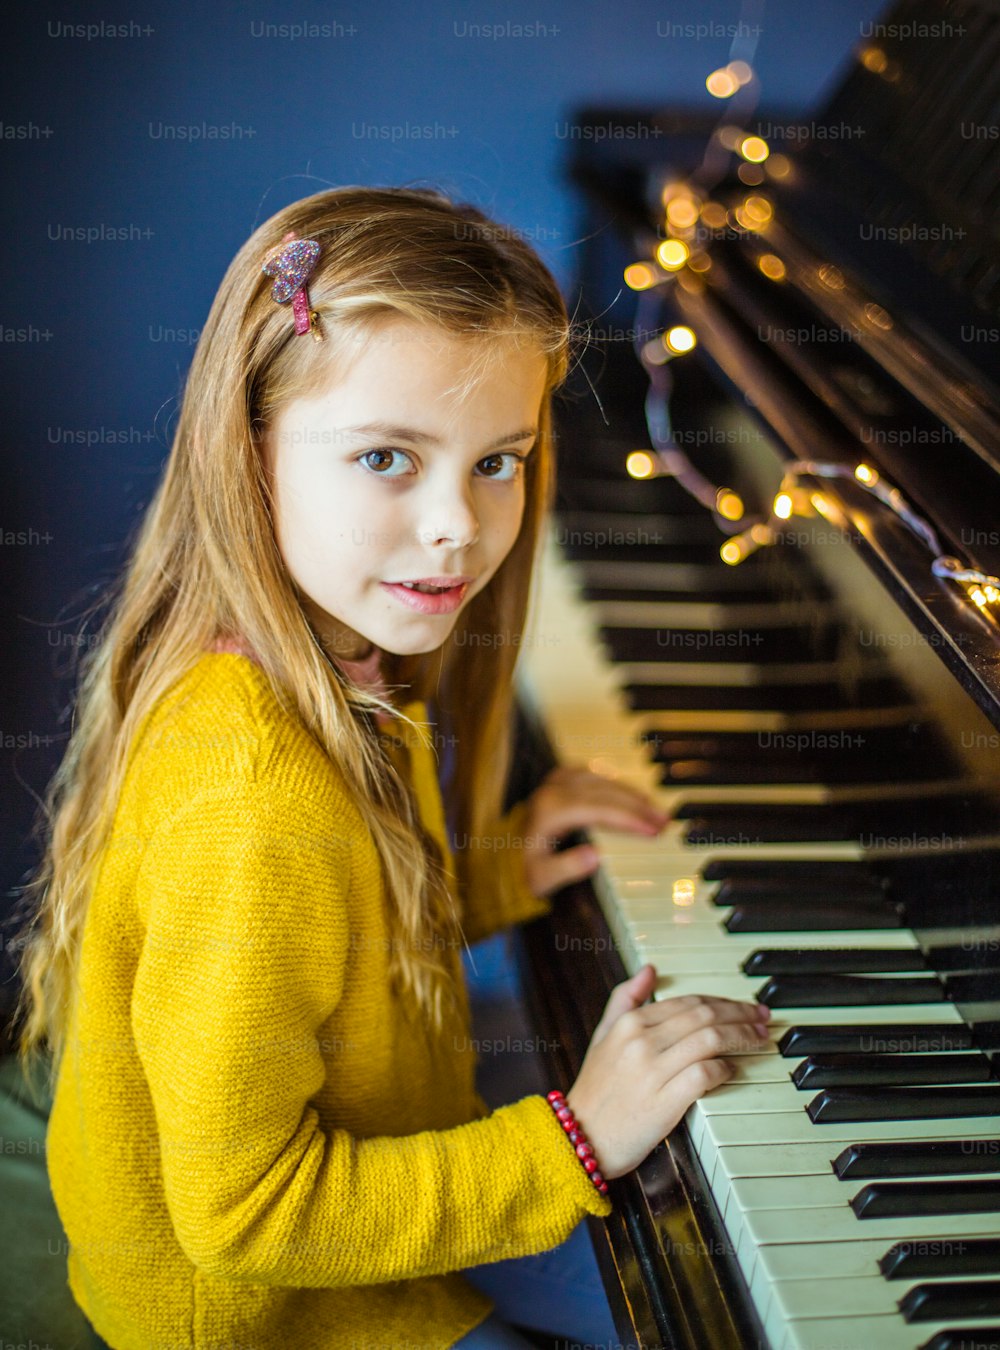 I was born to be a pianist. Little girl playing piano.